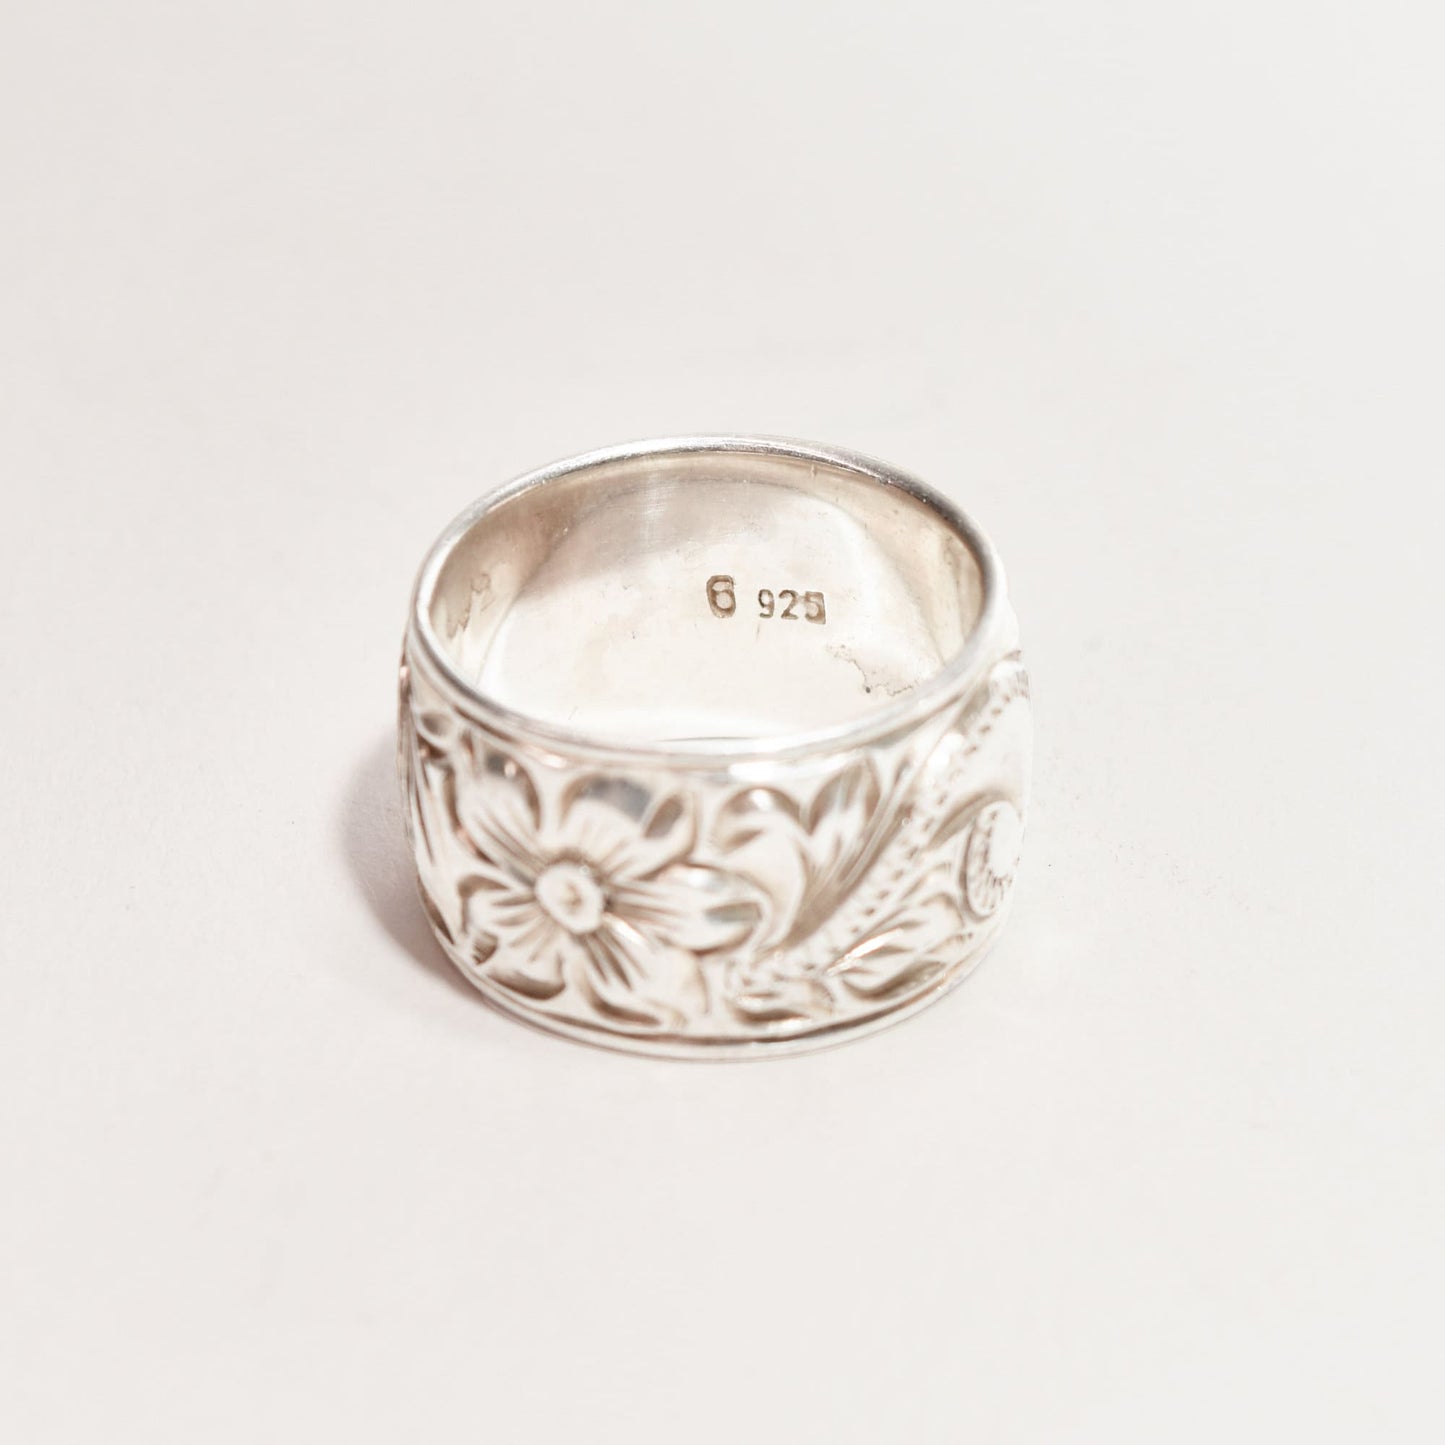 Floral engraved sterling silver band ring, 11.5mm wide with Art Nouveau revival style, showing size 6 US hallmark on inner surface against a white background.